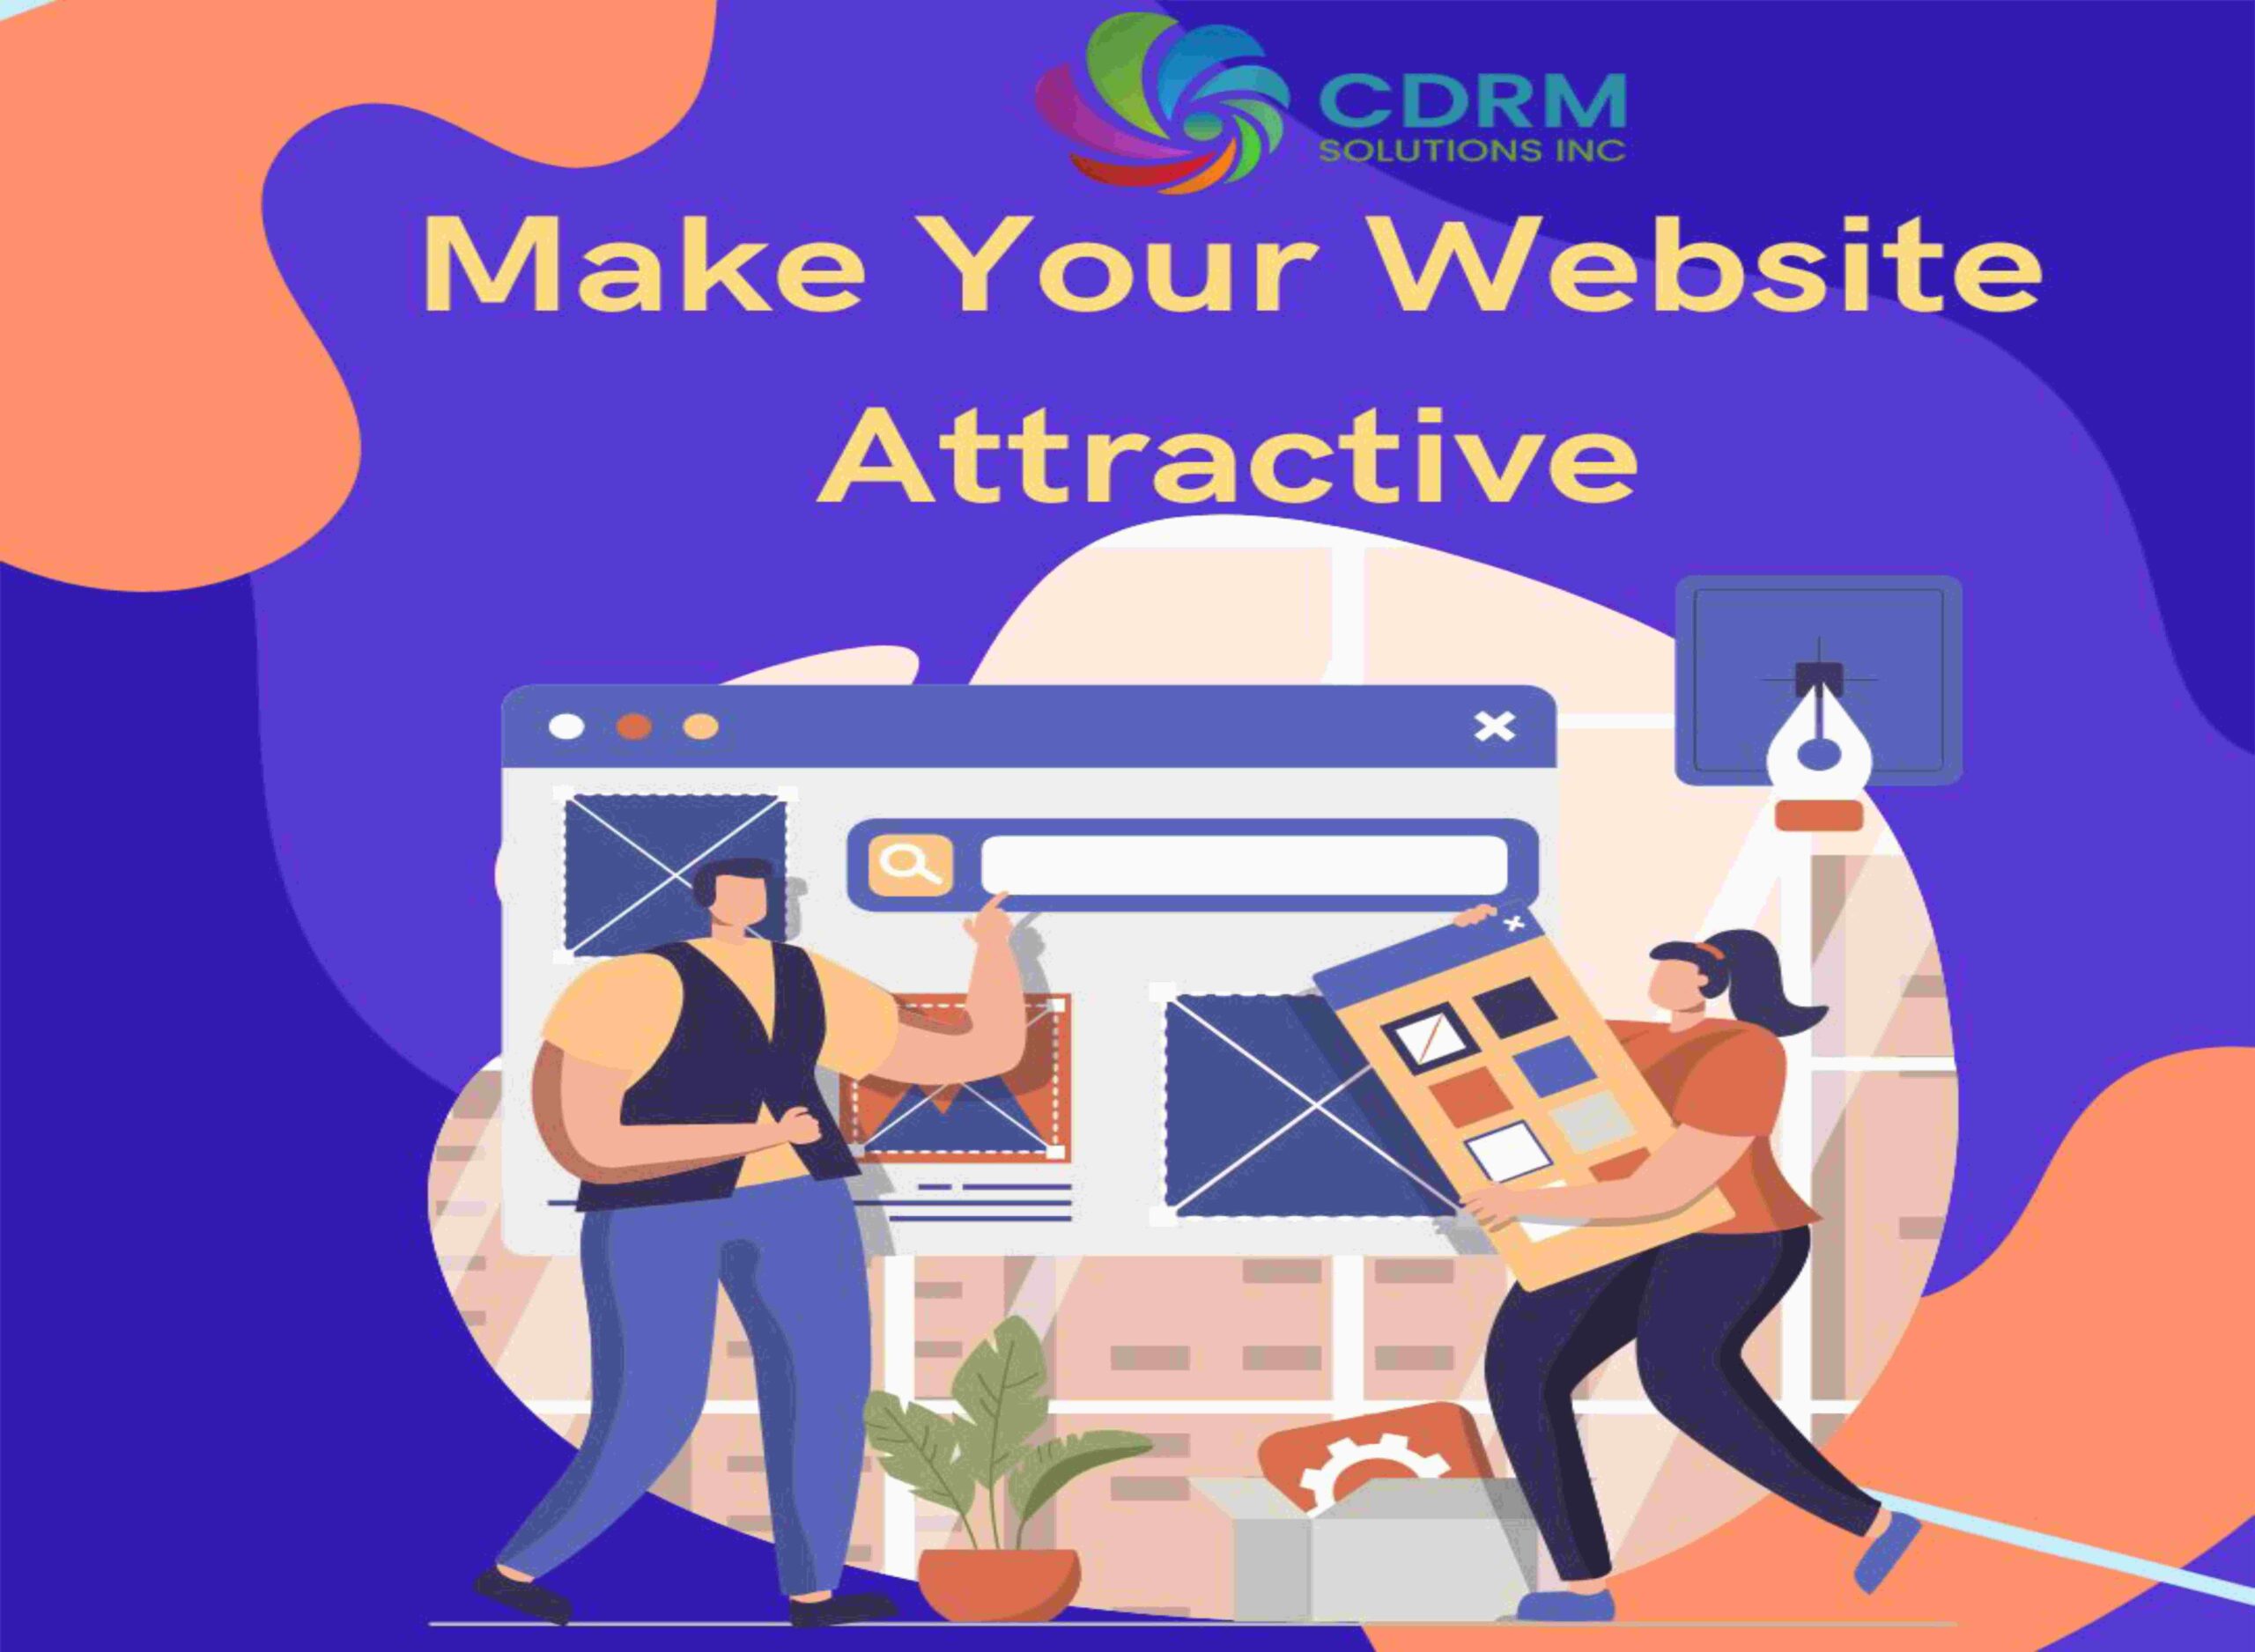 How To Make Your Website Attractive?